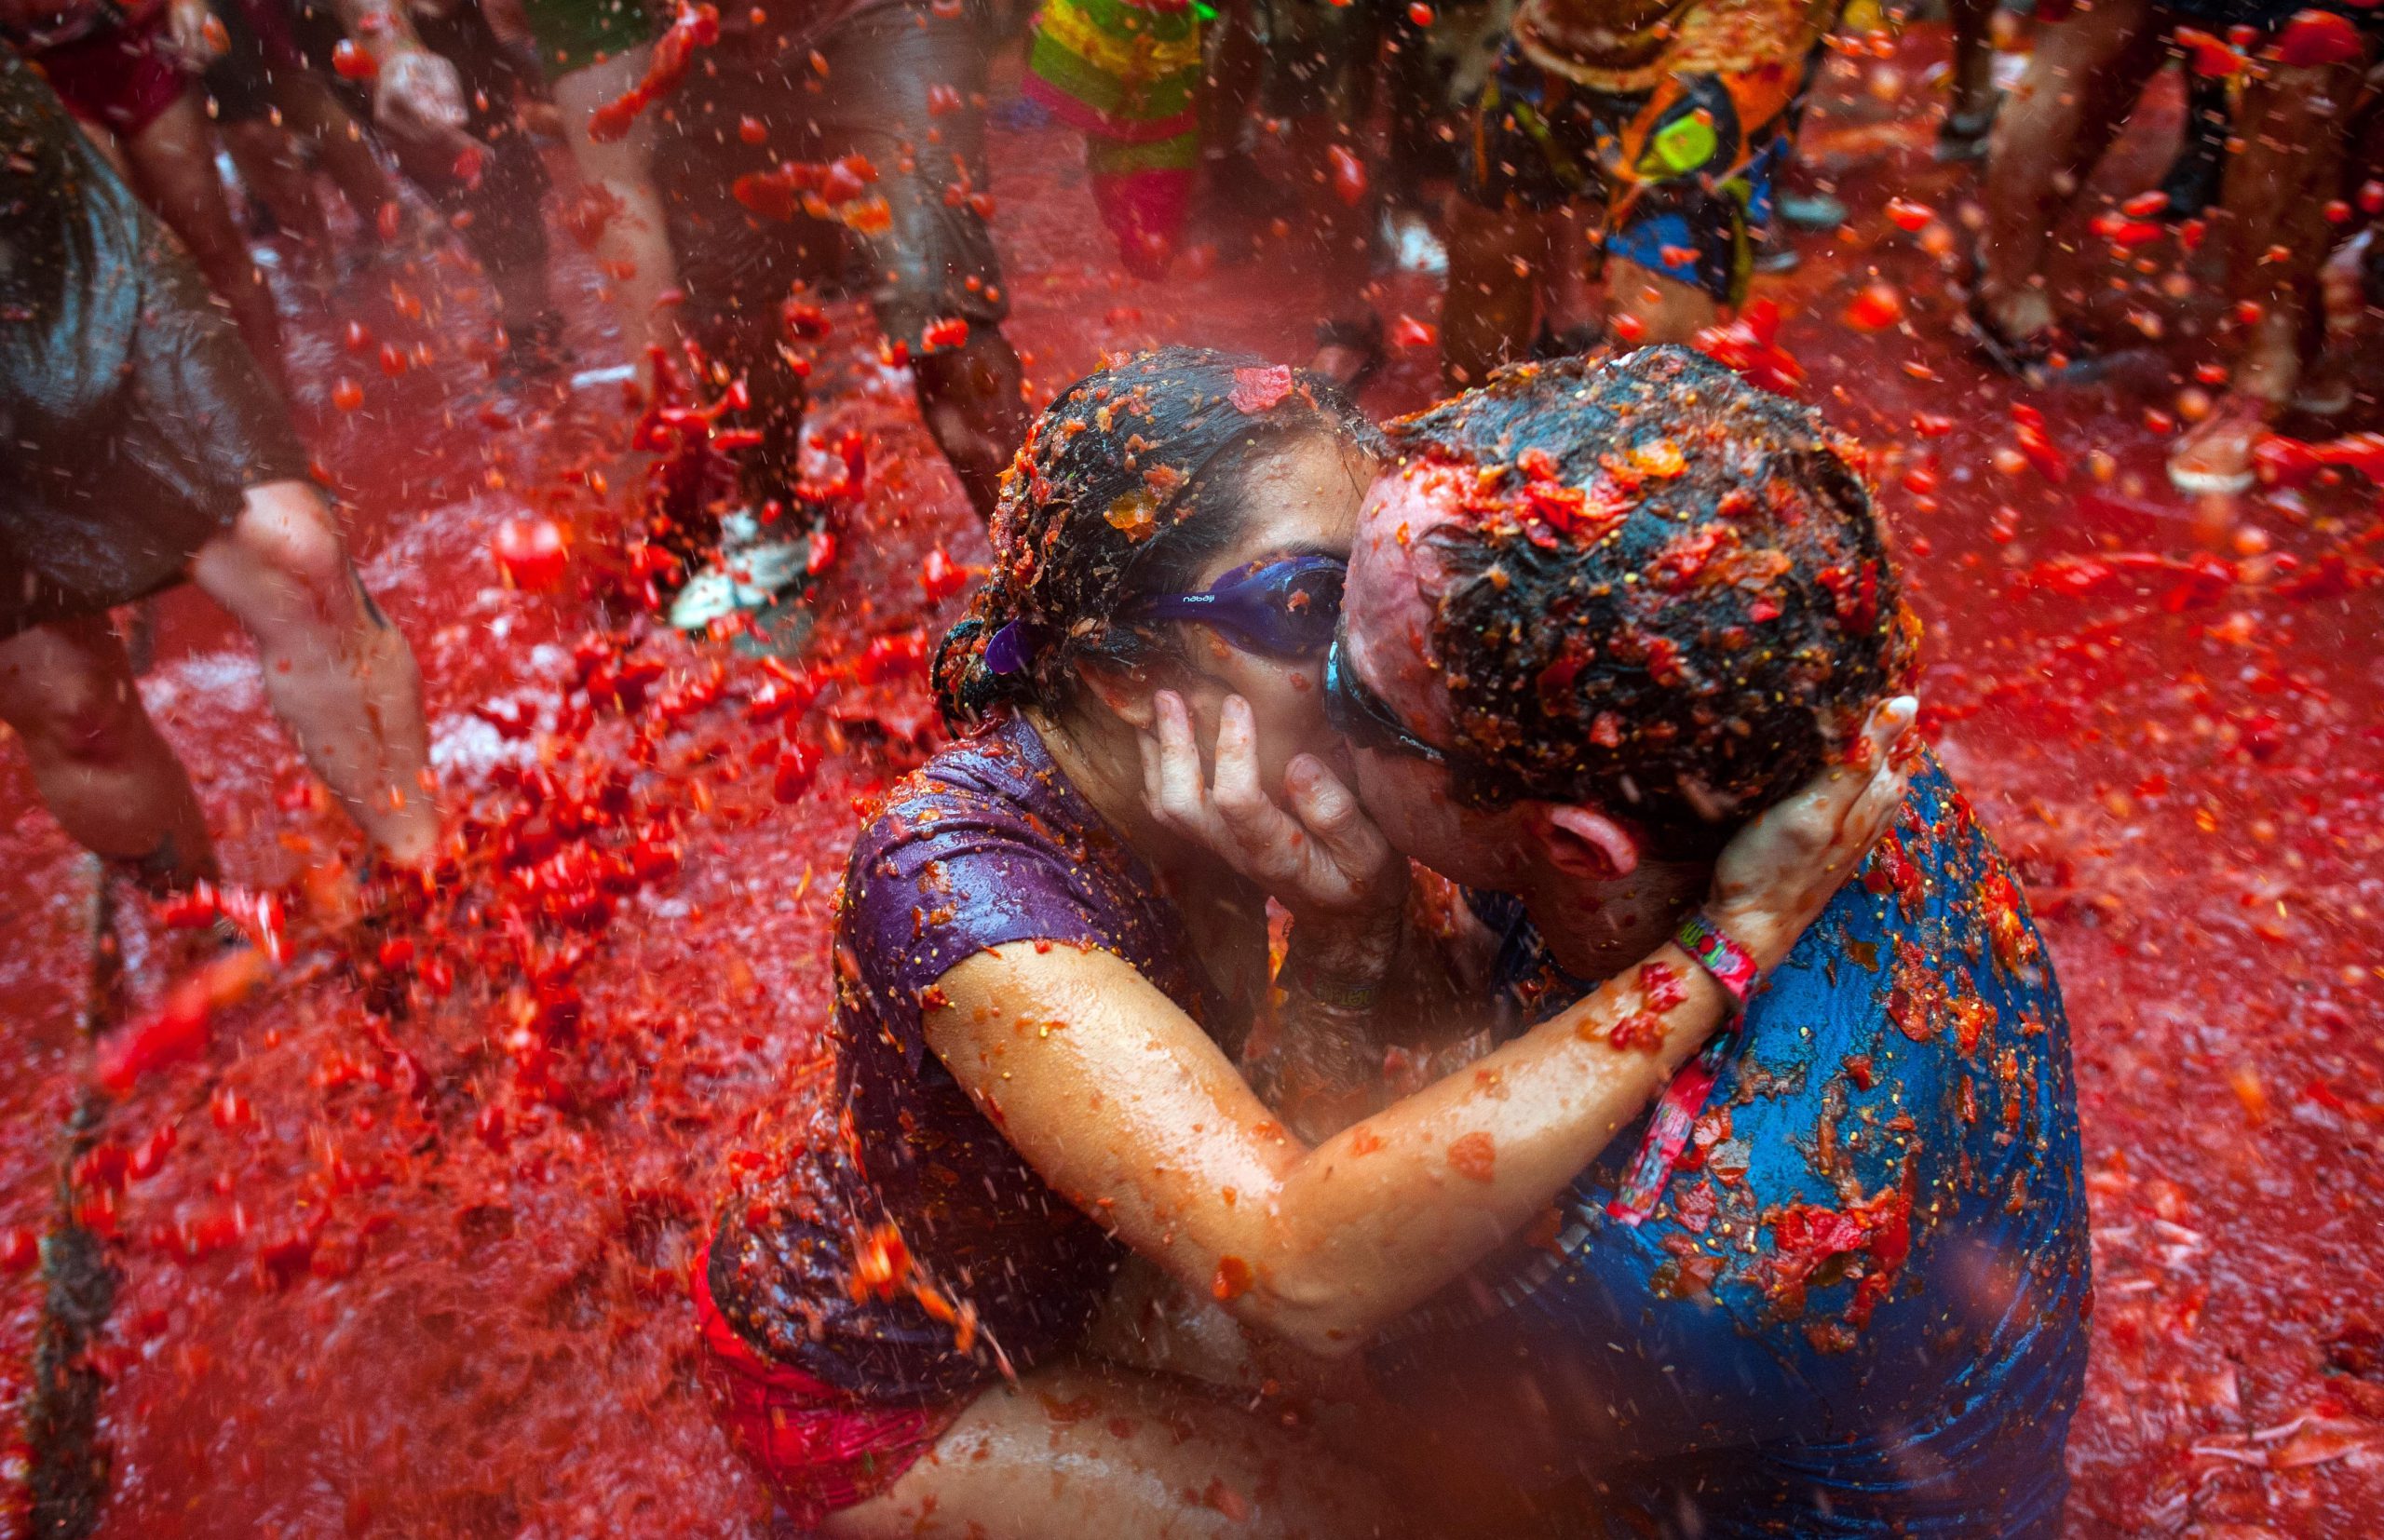 The World's Biggest Tomato Fight At Tomatina Festival 2013